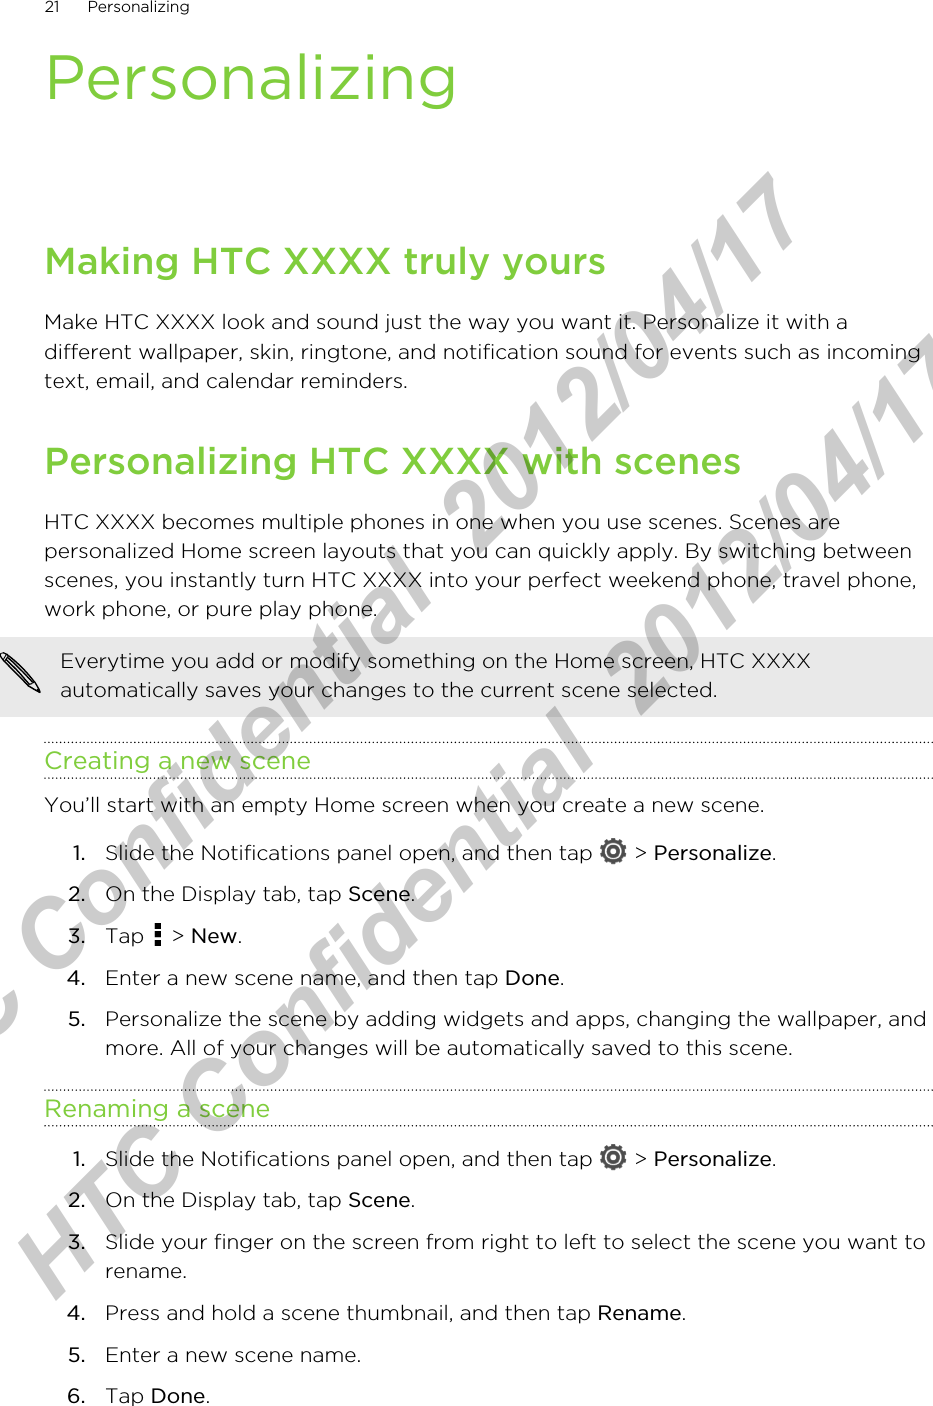 PersonalizingMaking HTC XXXX truly yoursMake HTC XXXX look and sound just the way you want it. Personalize it with adifferent wallpaper, skin, ringtone, and notification sound for events such as incomingtext, email, and calendar reminders.Personalizing HTC XXXX with scenesHTC XXXX becomes multiple phones in one when you use scenes. Scenes arepersonalized Home screen layouts that you can quickly apply. By switching betweenscenes, you instantly turn HTC XXXX into your perfect weekend phone, travel phone,work phone, or pure play phone.Everytime you add or modify something on the Home screen, HTC XXXXautomatically saves your changes to the current scene selected.Creating a new sceneYou’ll start with an empty Home screen when you create a new scene.1. Slide the Notifications panel open, and then tap   &gt; Personalize.2. On the Display tab, tap Scene.3. Tap   &gt; New.4. Enter a new scene name, and then tap Done.5. Personalize the scene by adding widgets and apps, changing the wallpaper, andmore. All of your changes will be automatically saved to this scene.Renaming a scene1. Slide the Notifications panel open, and then tap   &gt; Personalize.2. On the Display tab, tap Scene.3. Slide your finger on the screen from right to left to select the scene you want torename.4. Press and hold a scene thumbnail, and then tap Rename.5. Enter a new scene name.6. Tap Done.21 PersonalizingHTC Confidential  2012/04/17  HTC Confidential  2012/04/17 